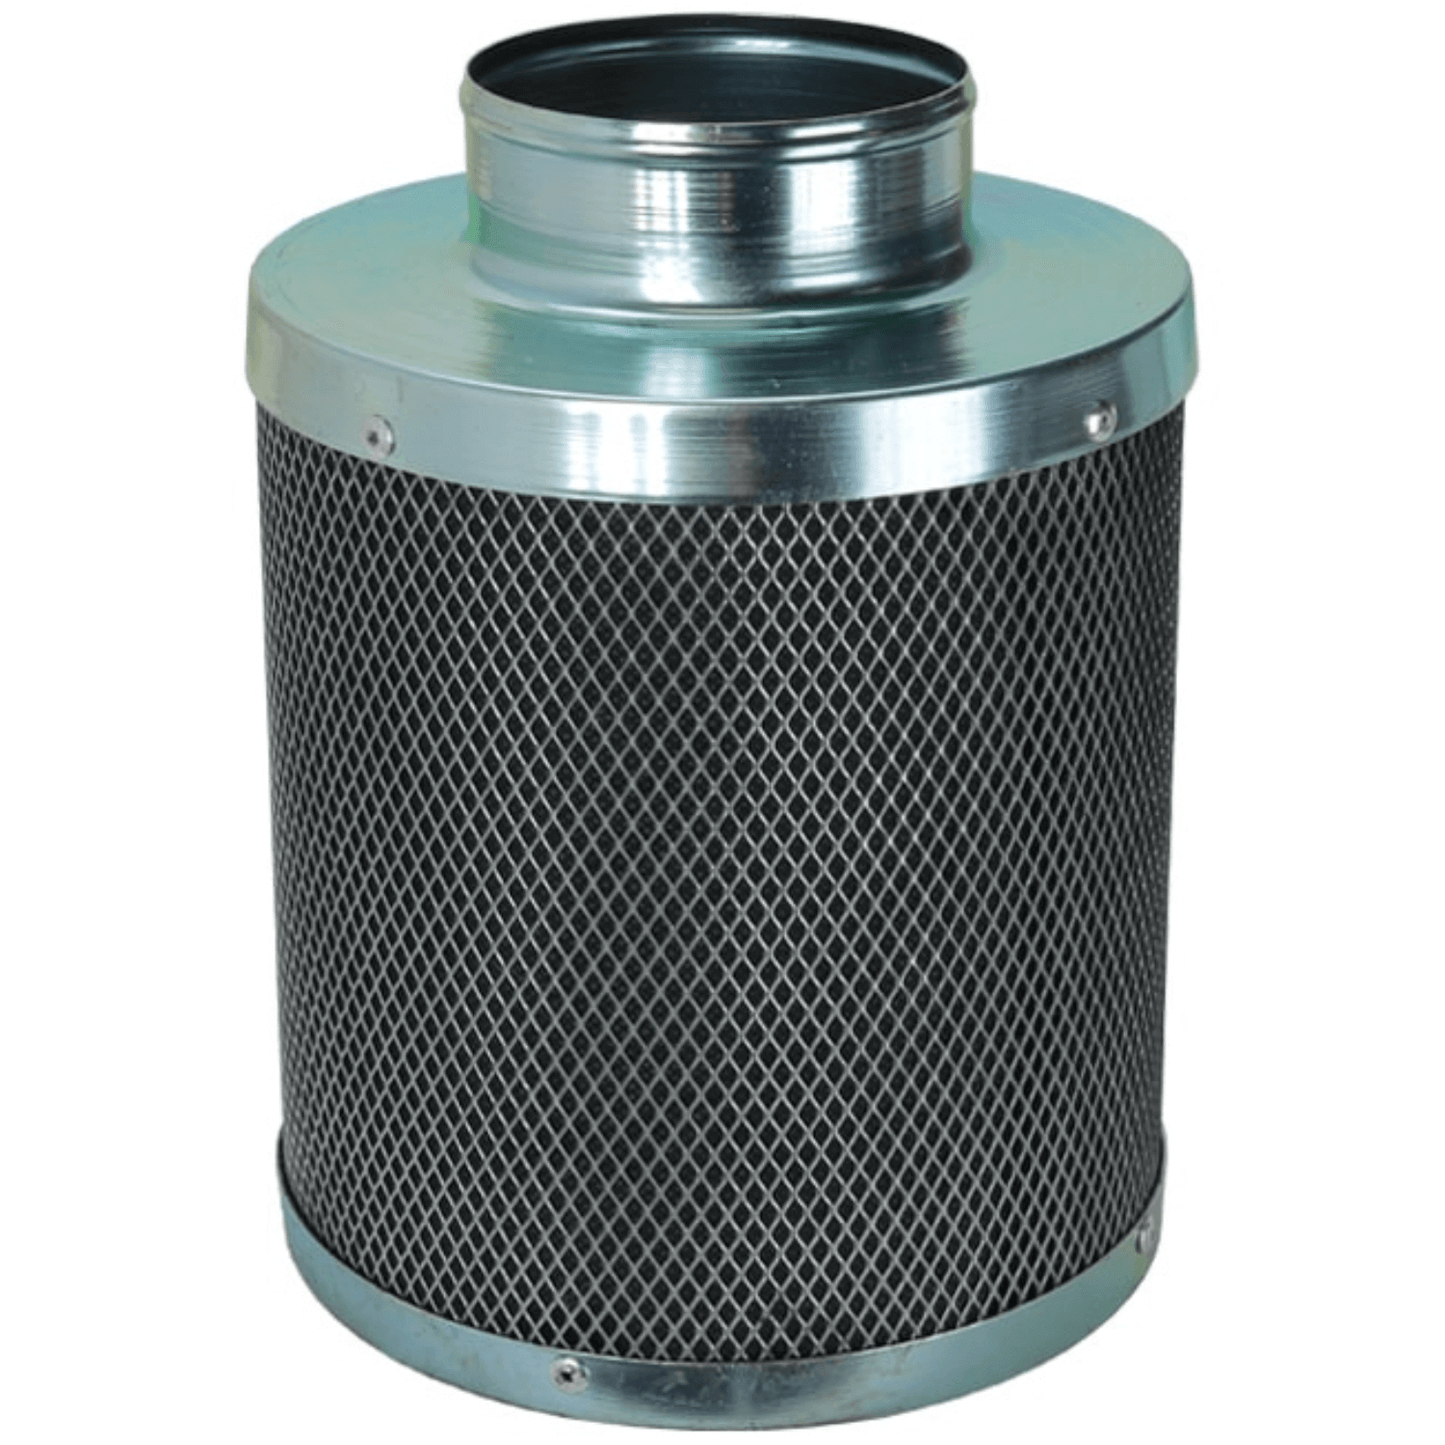 Charco Filters Plus 12" x 40" Activated Carbon Air Filter 971212-1 Climate Control 850009530714